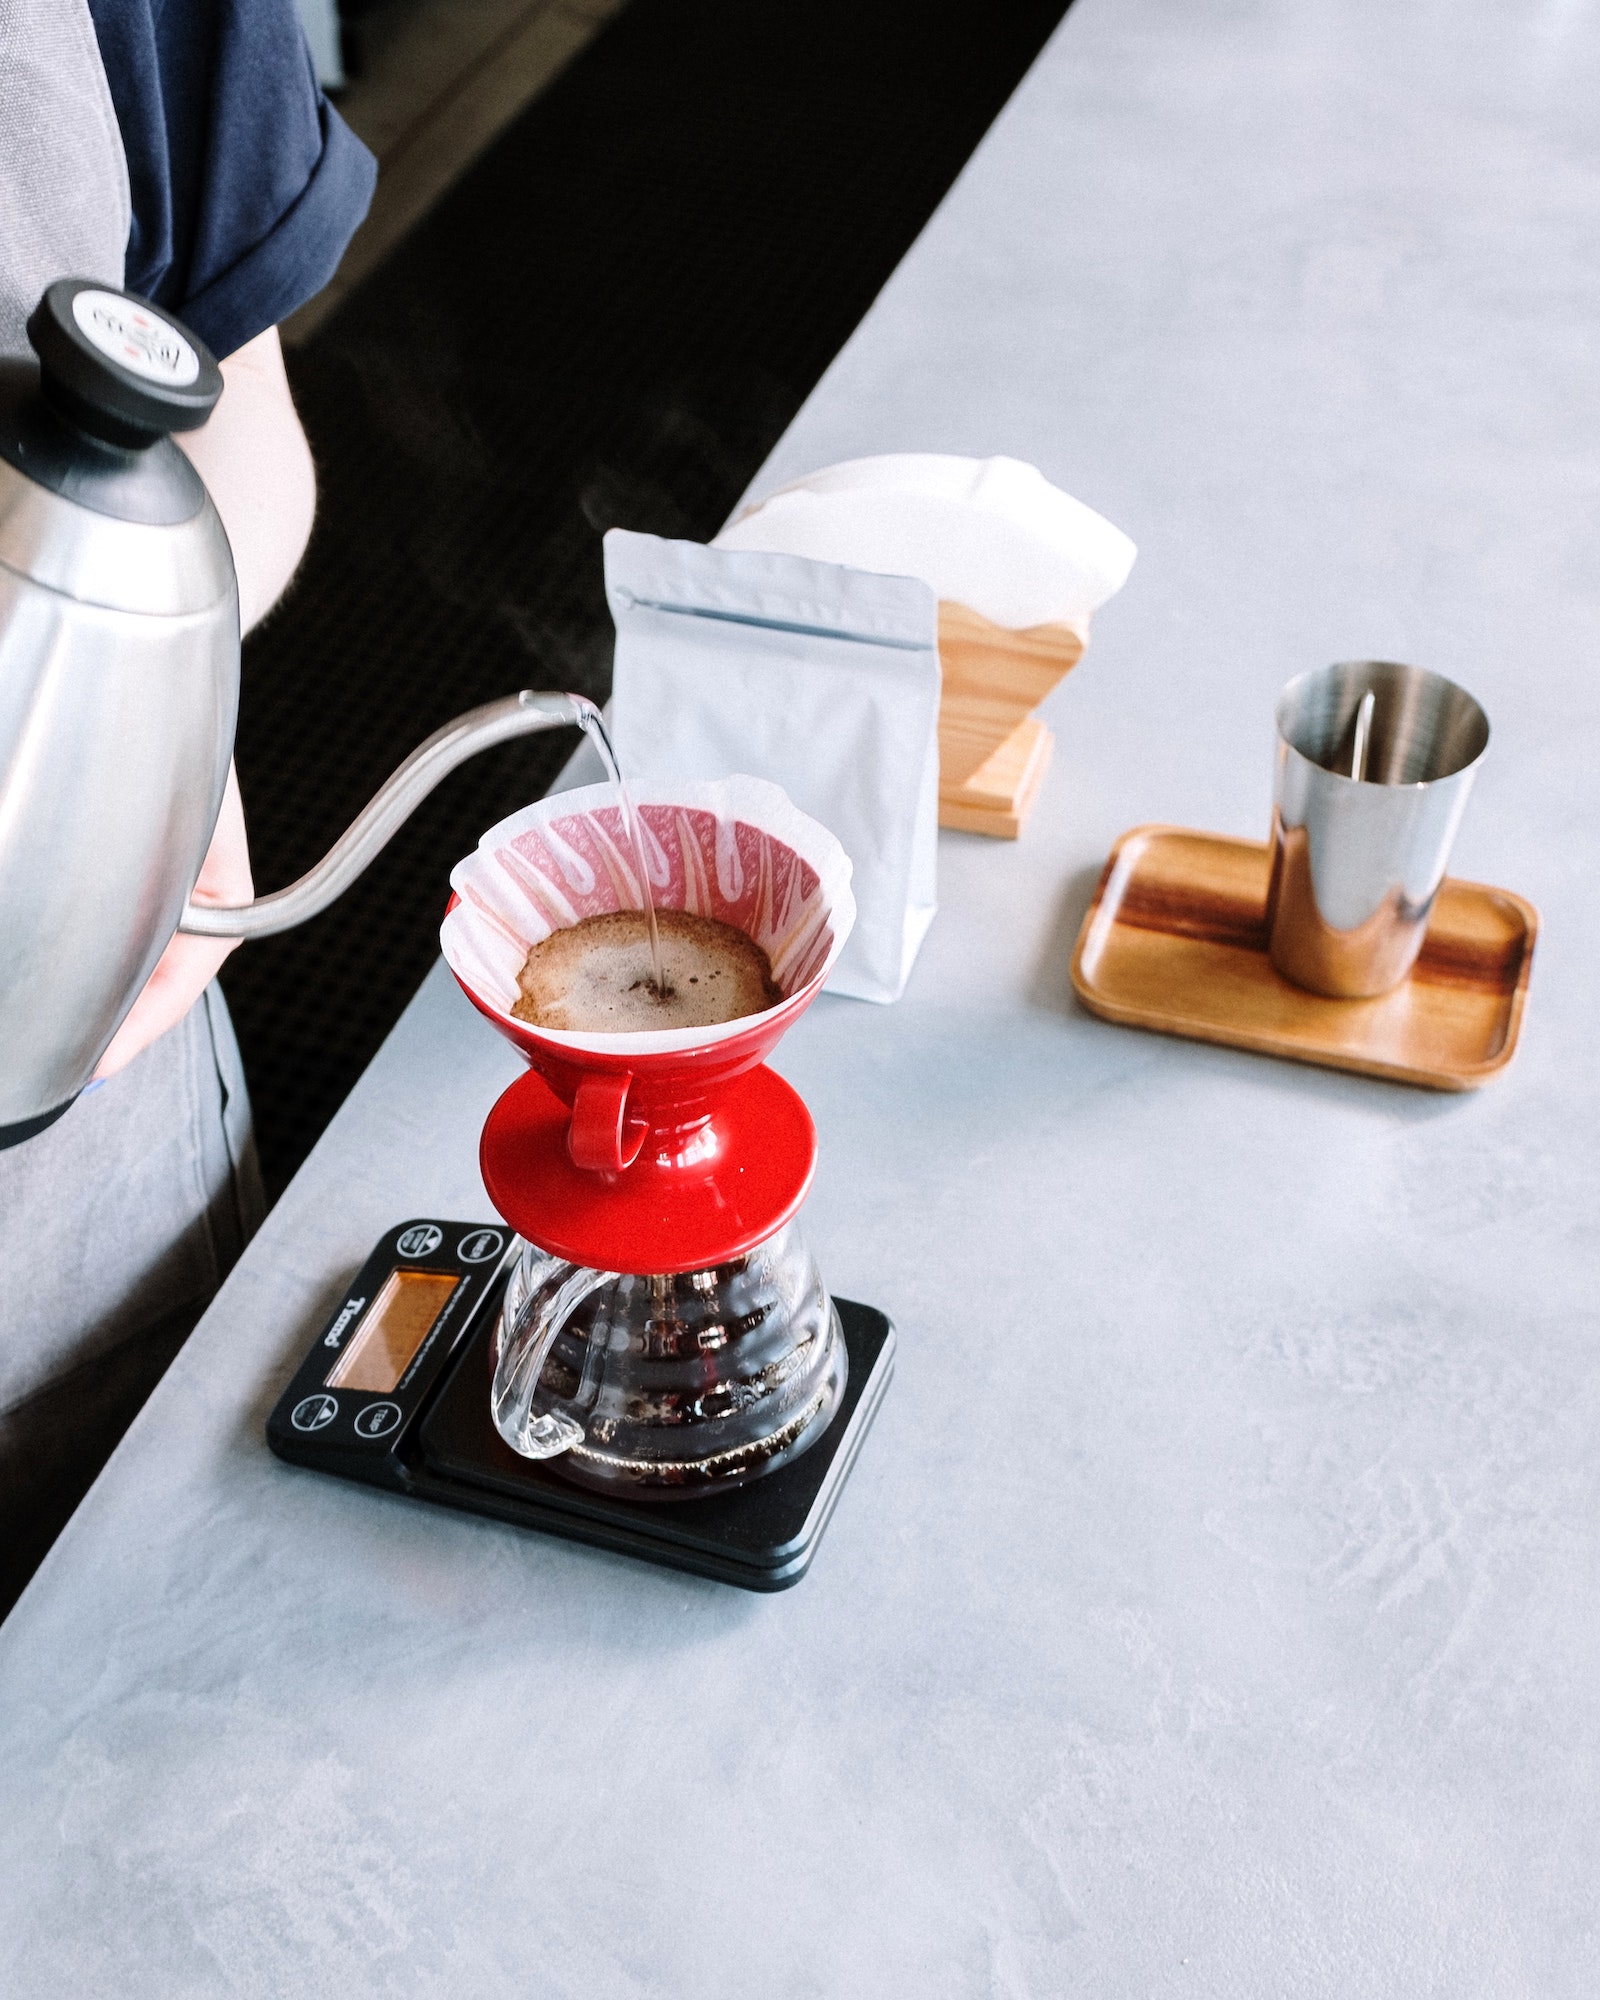 Coffee home brewing methods: The V60 is known for producing flavorful and balanced coffee